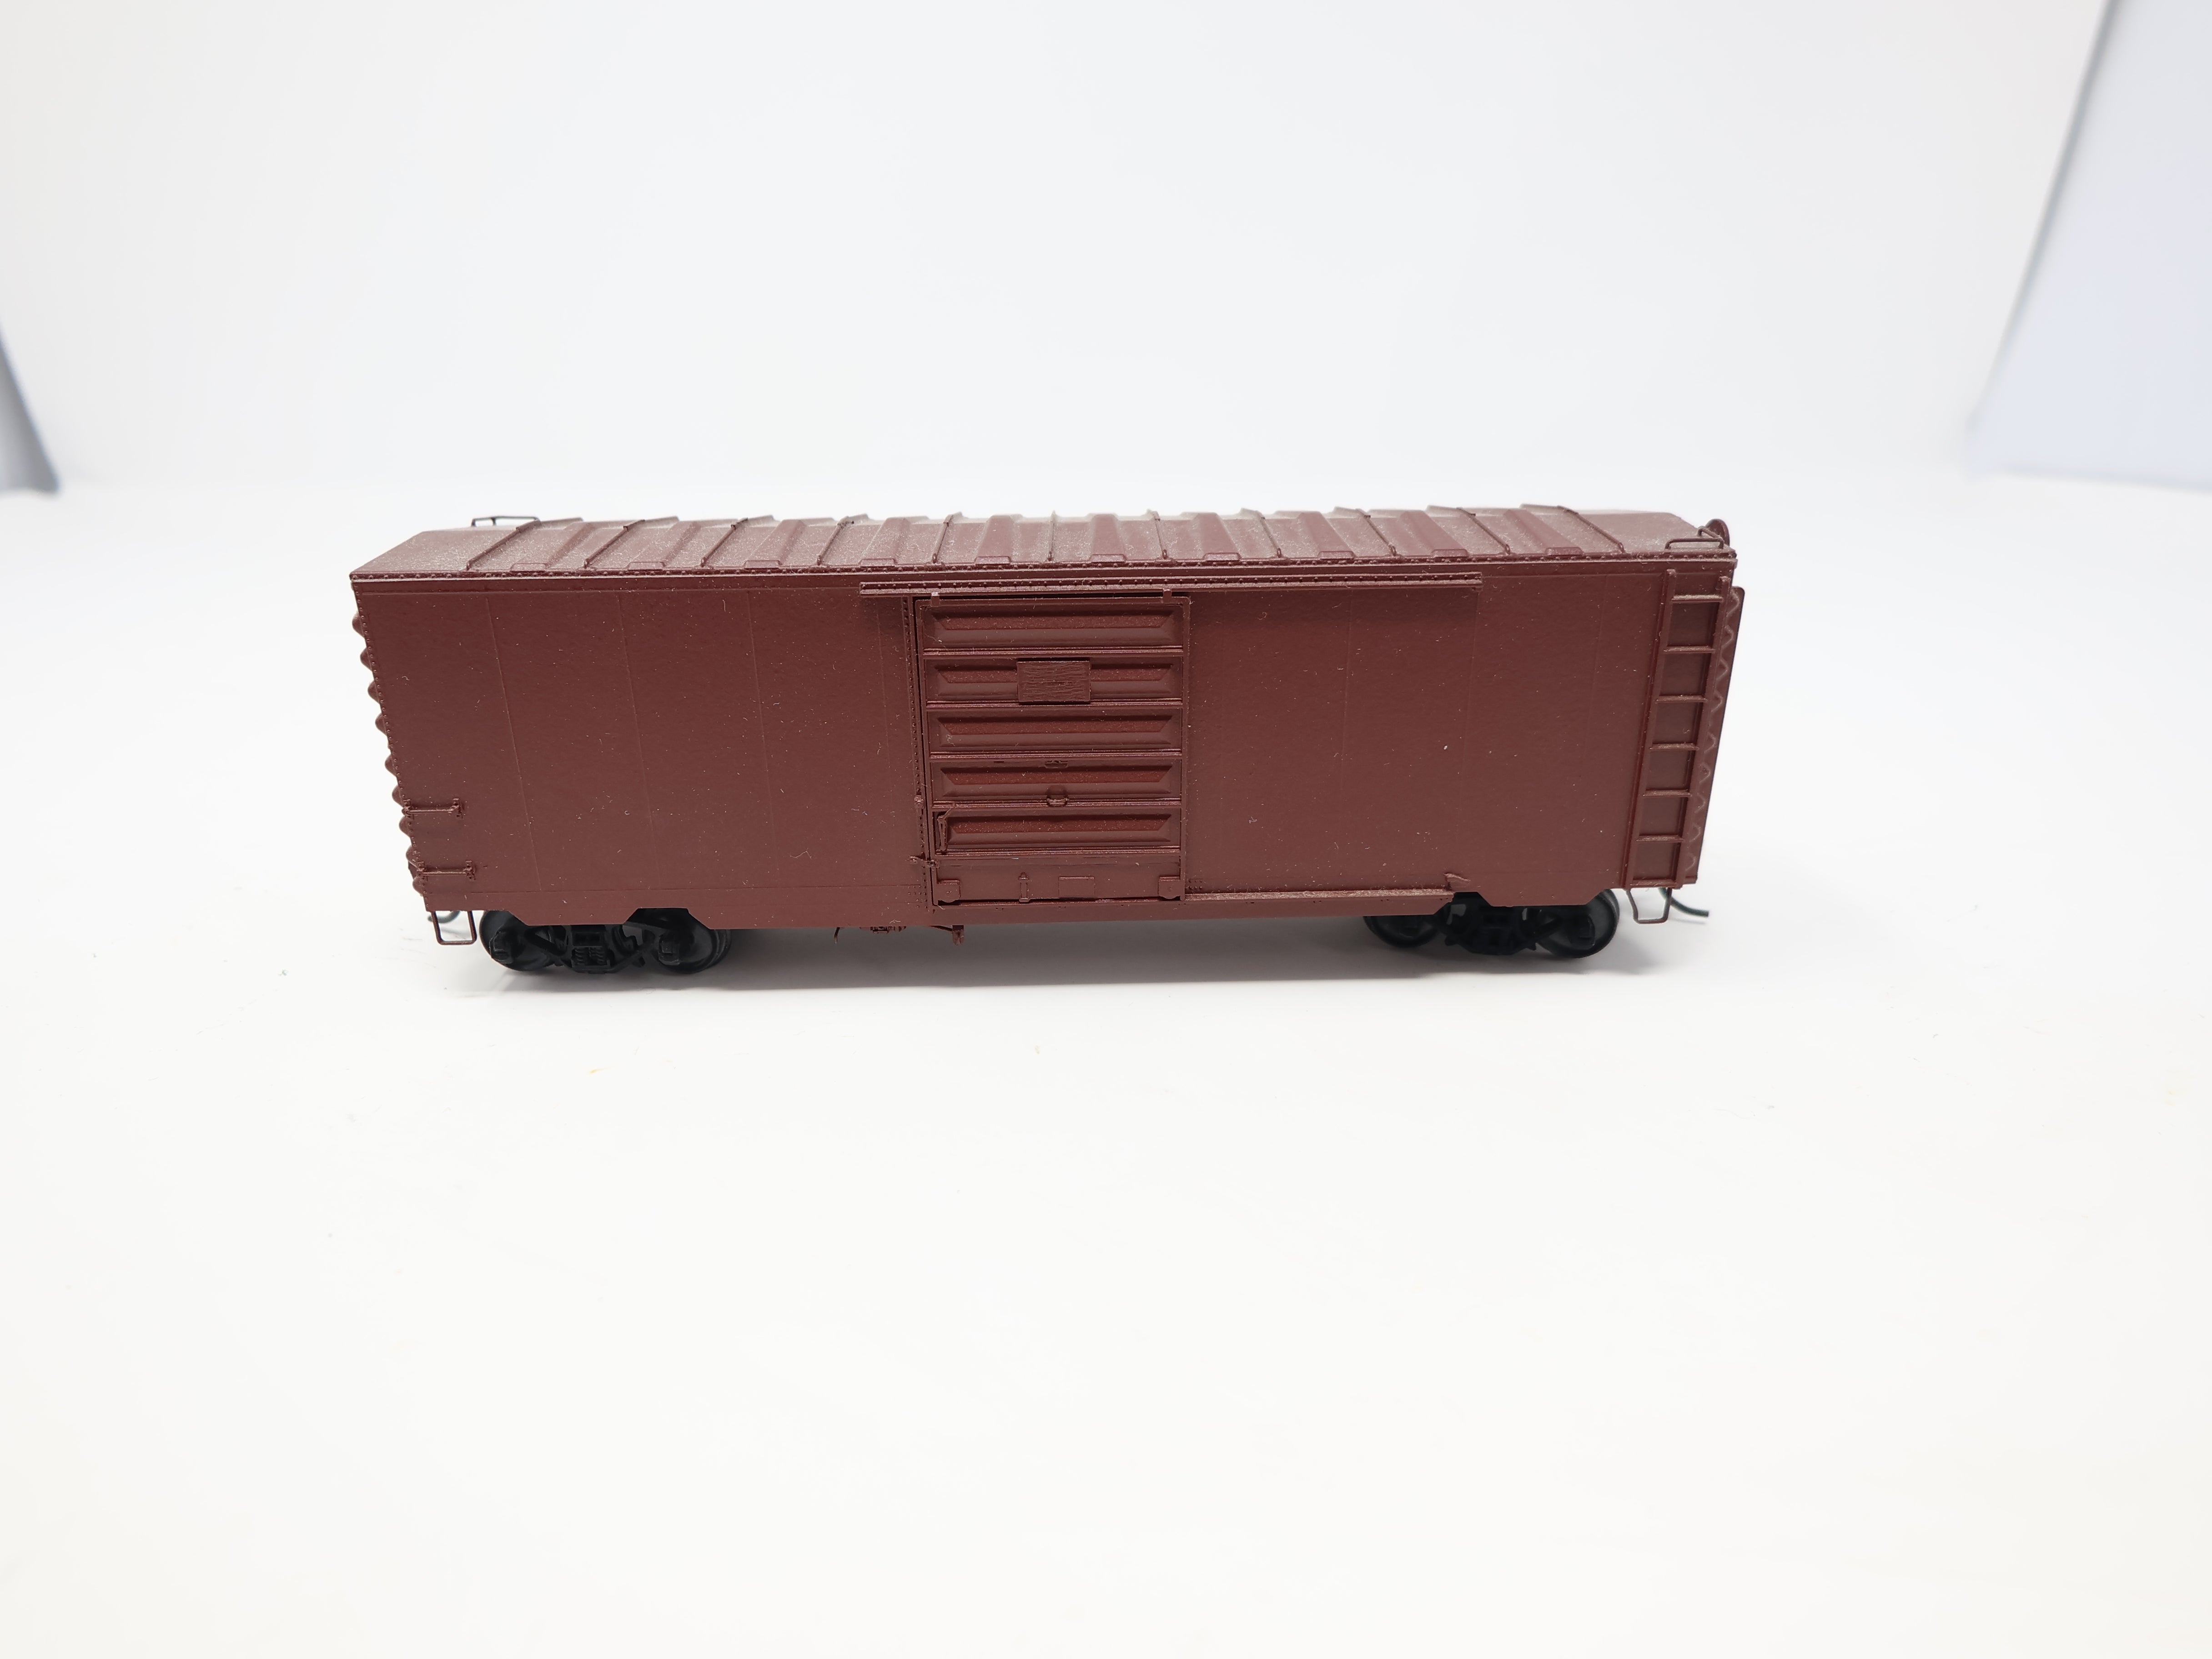 USED HO Scale, Undecorated 40' Box Car